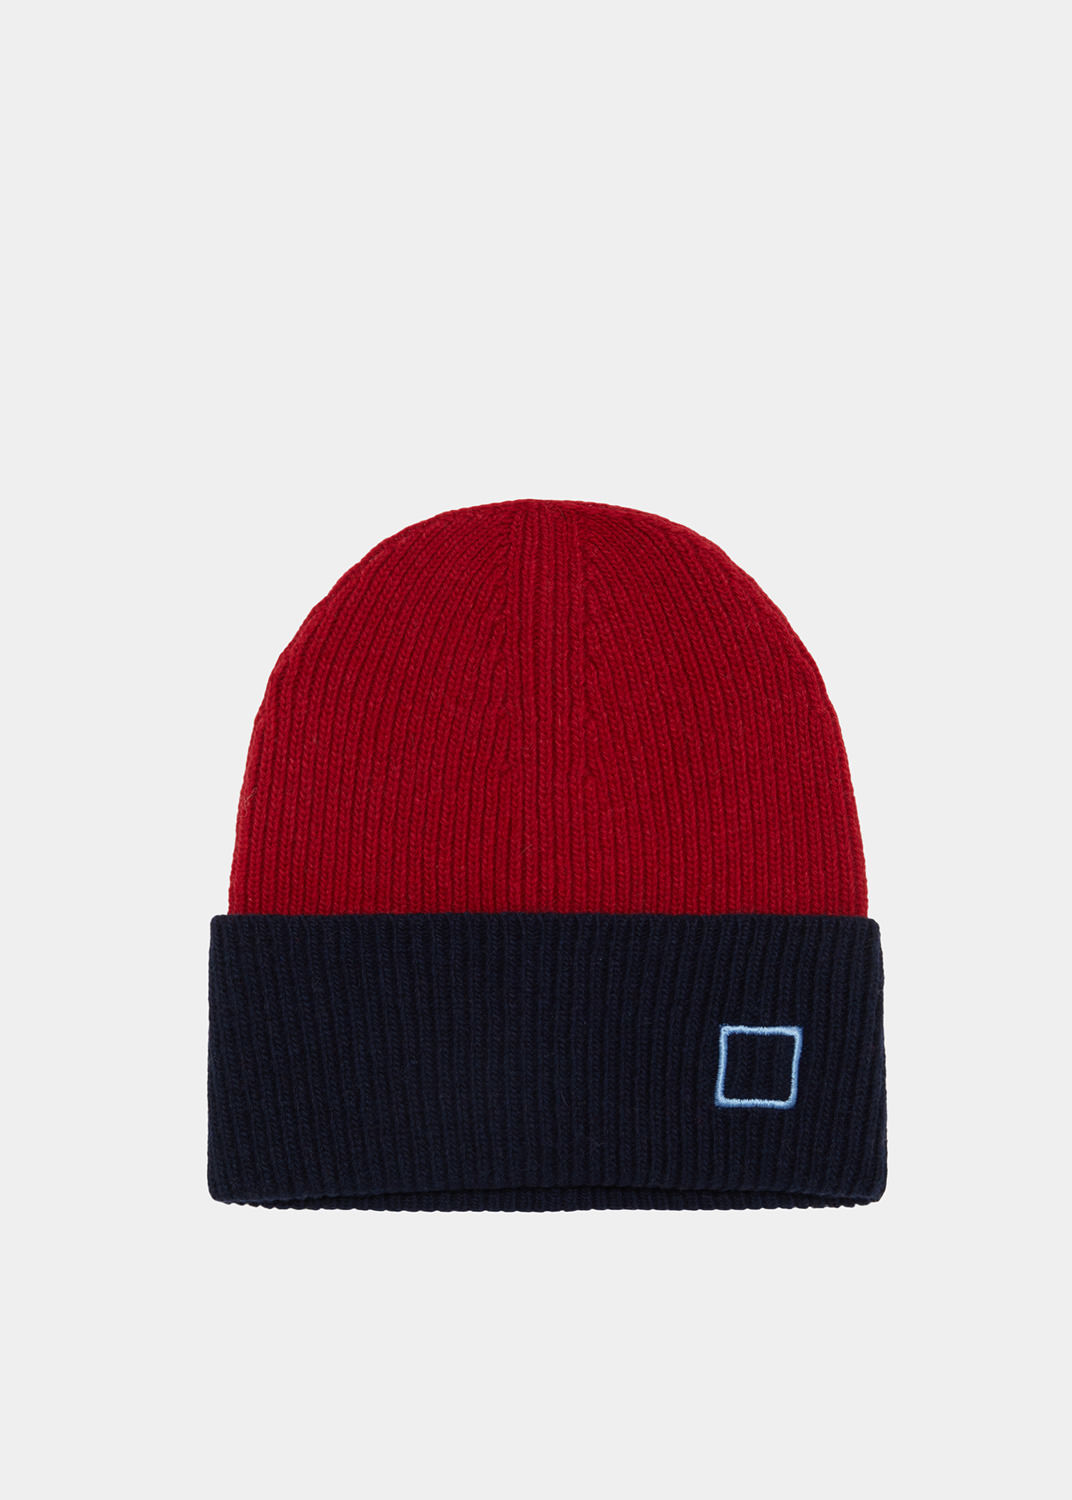 D.A.T.E.: BETTO WOOL RED-BLUE